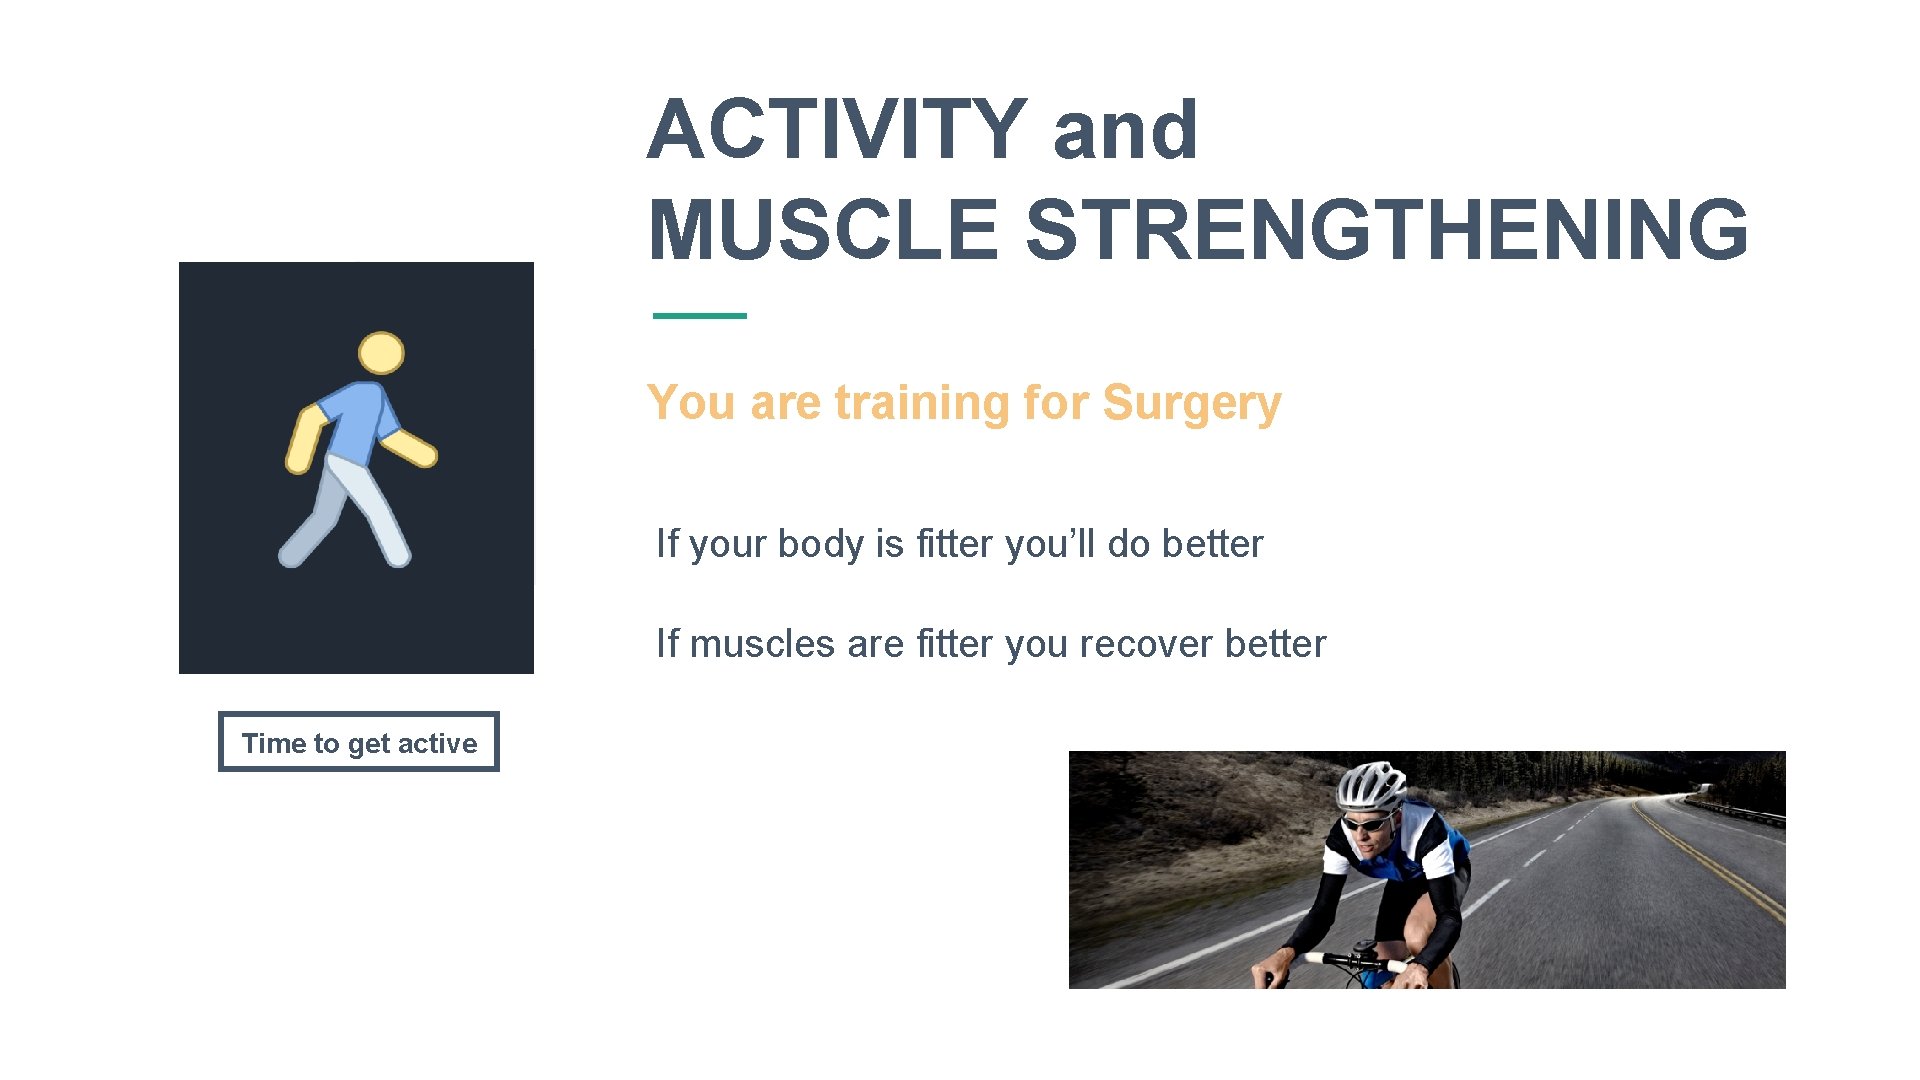 ACTIVITY and MUSCLE STRENGTHENING You are training for Surgery If your body is fitter